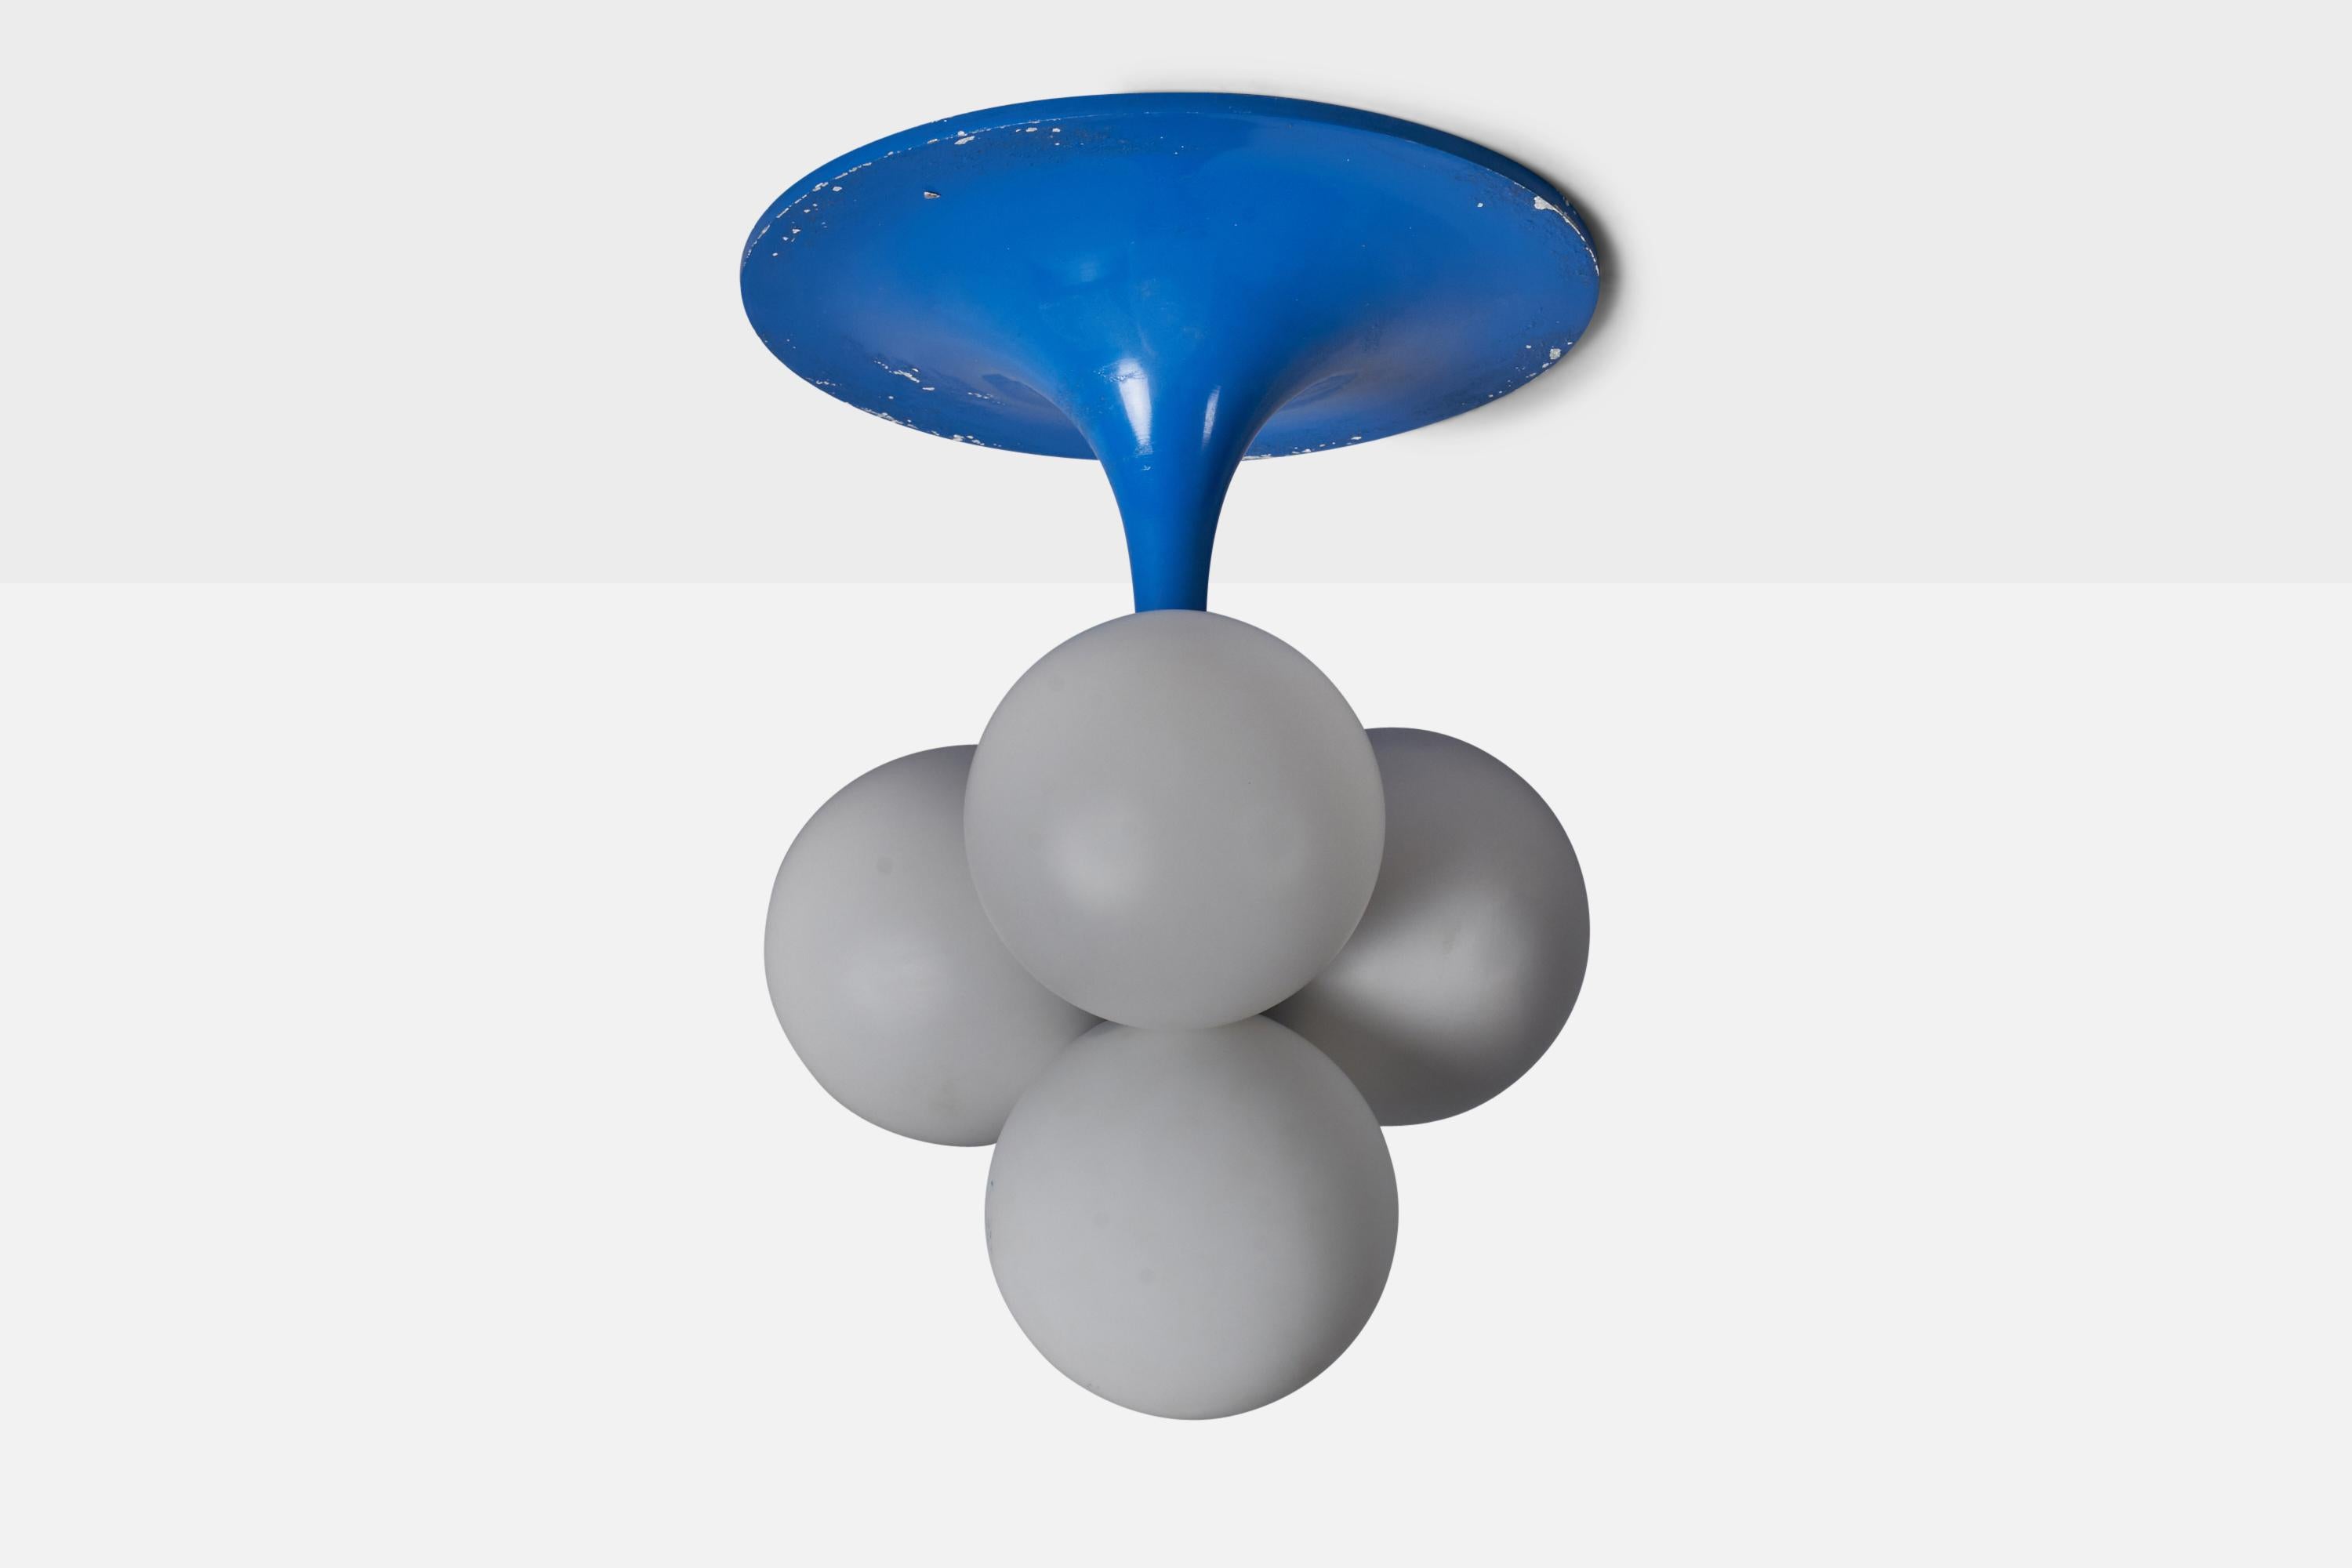 A blue-lacquered metal and glass chandelier designed and produced in Italy, 1960s.

Overall Dimensions (inches): 21